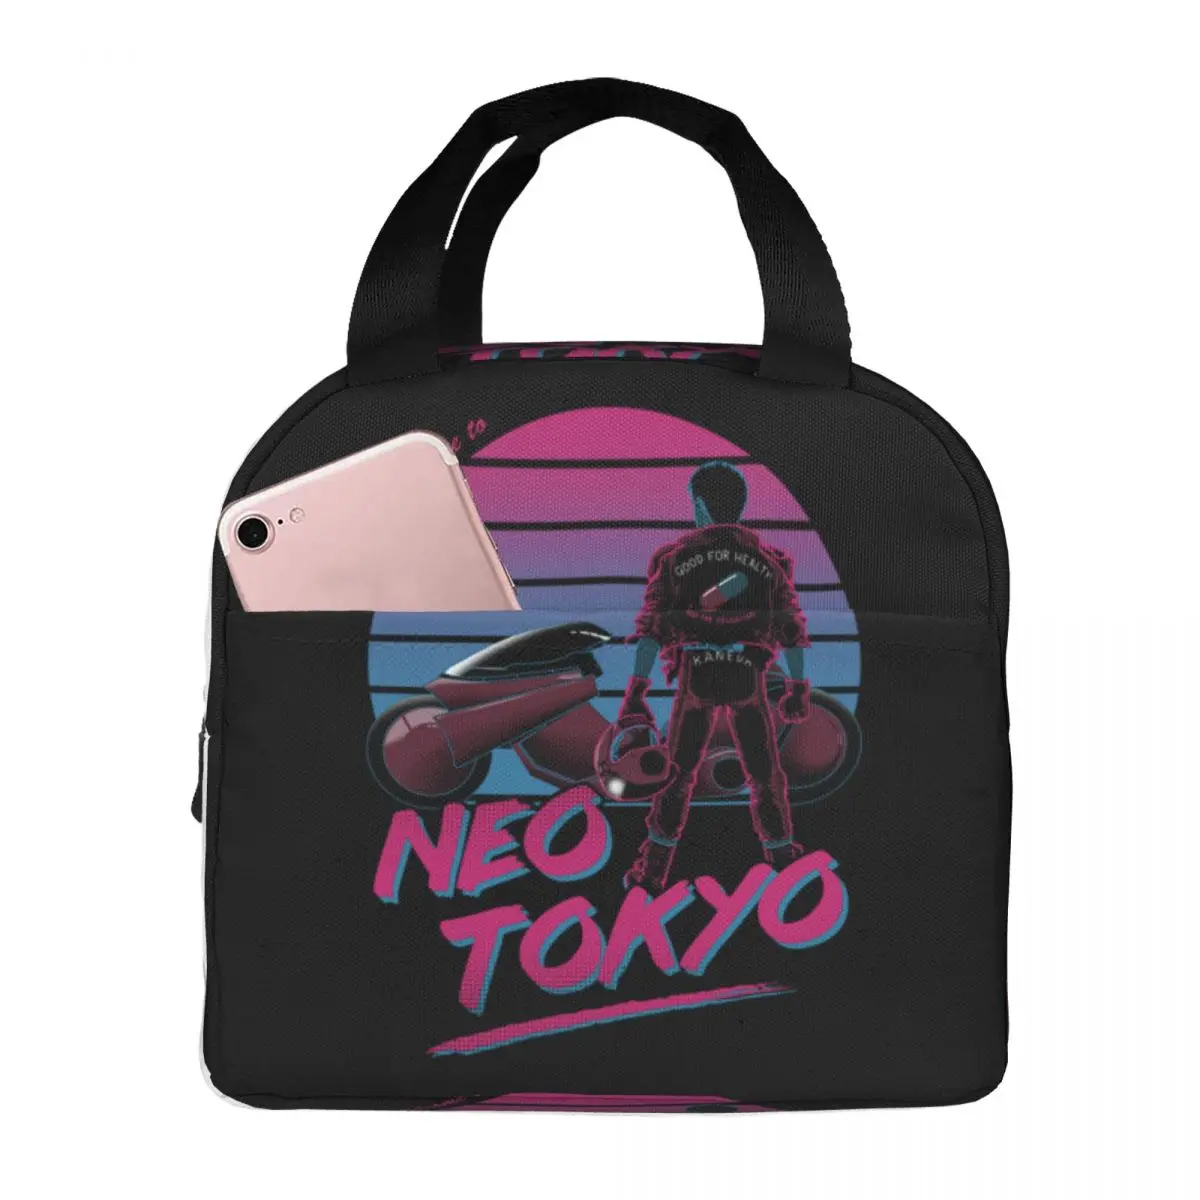 Akira Welcome To Neo Tokyo Lunch Bag Waterproof Insulated Canvas Cooler Thermal Food Picnic Work Lunch Box for Women Children